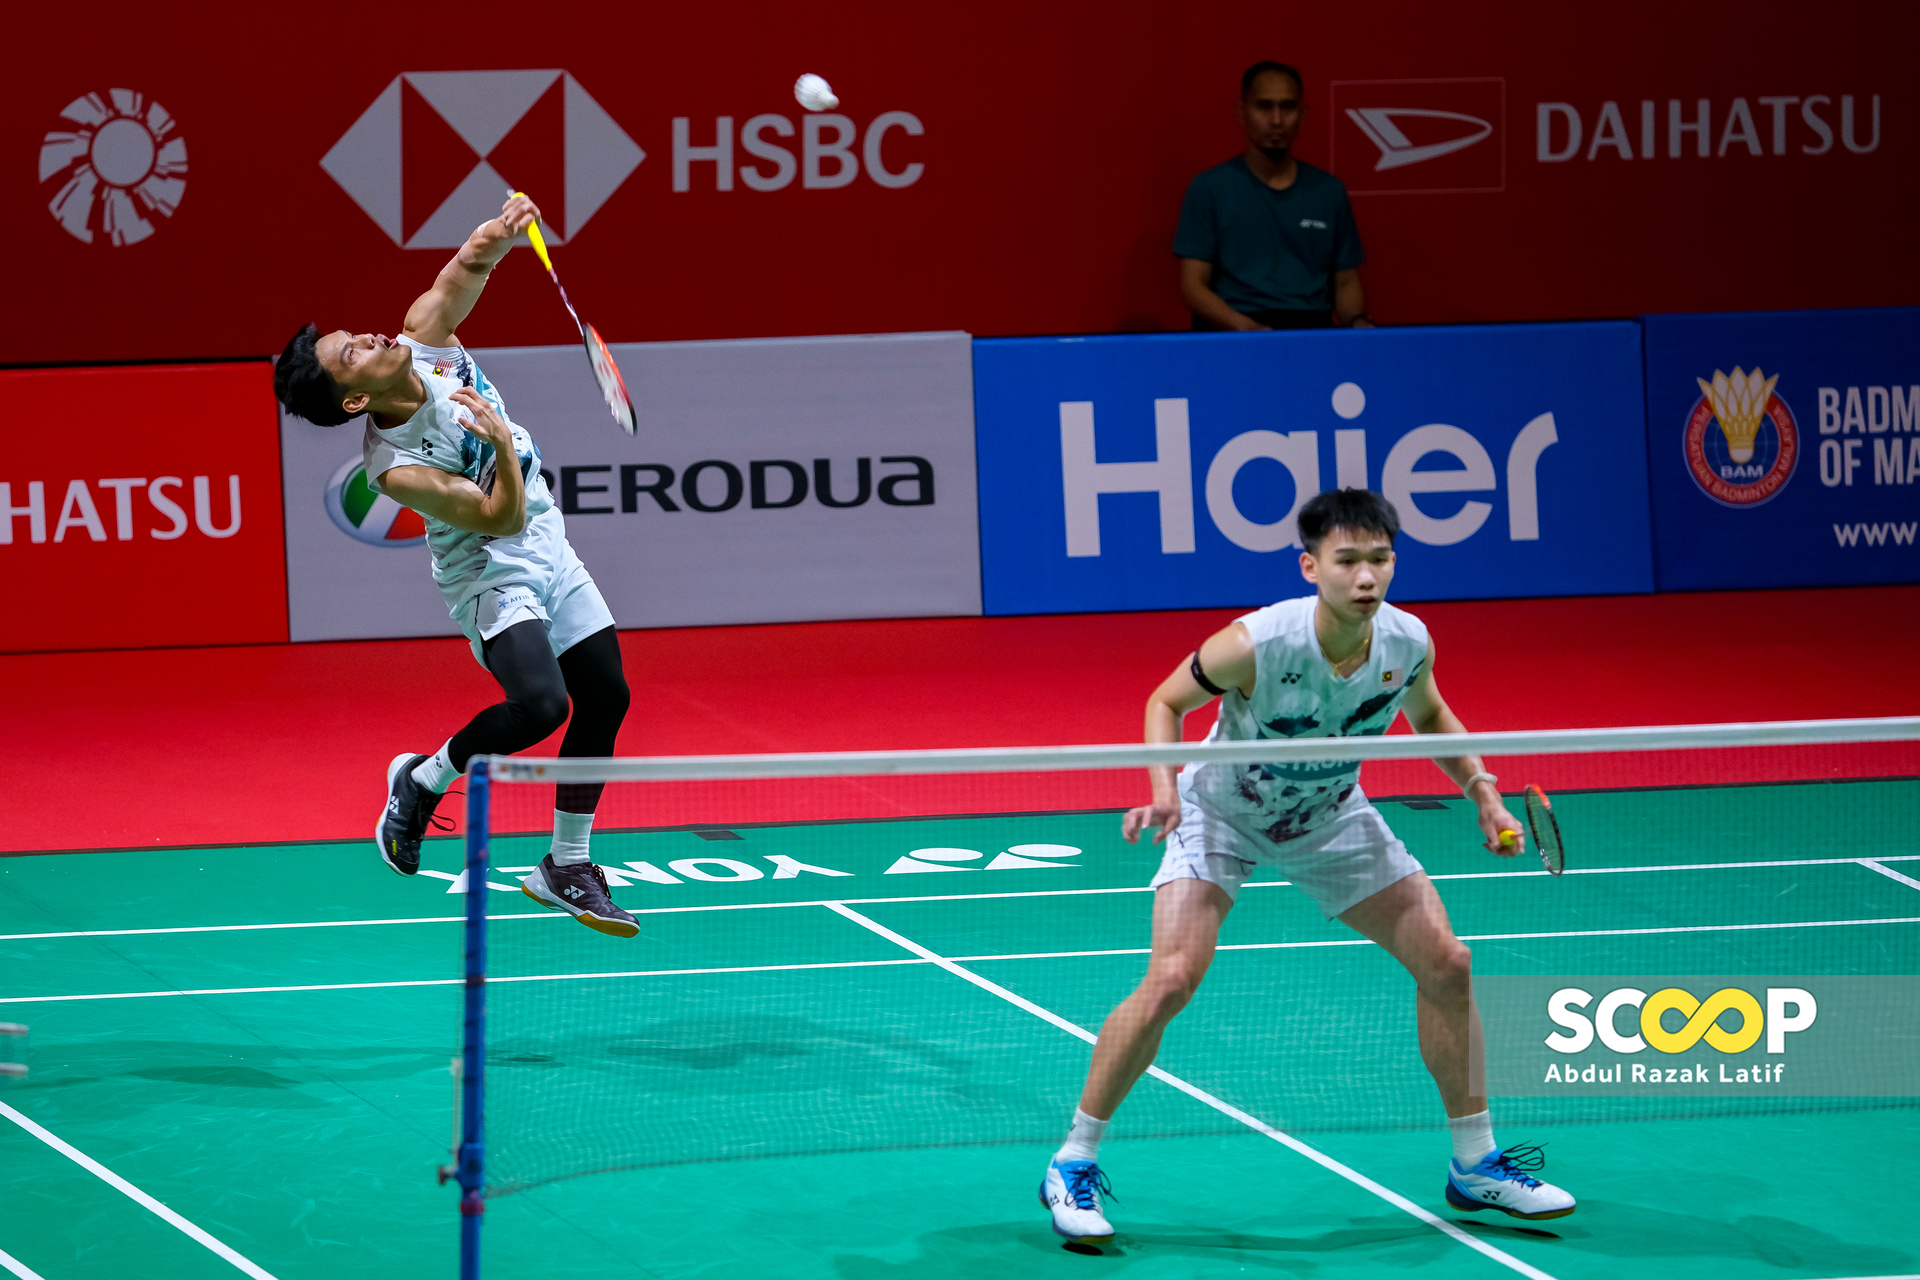 National men’s doubles display prowess at Malaysia Masters, booking quarters slot